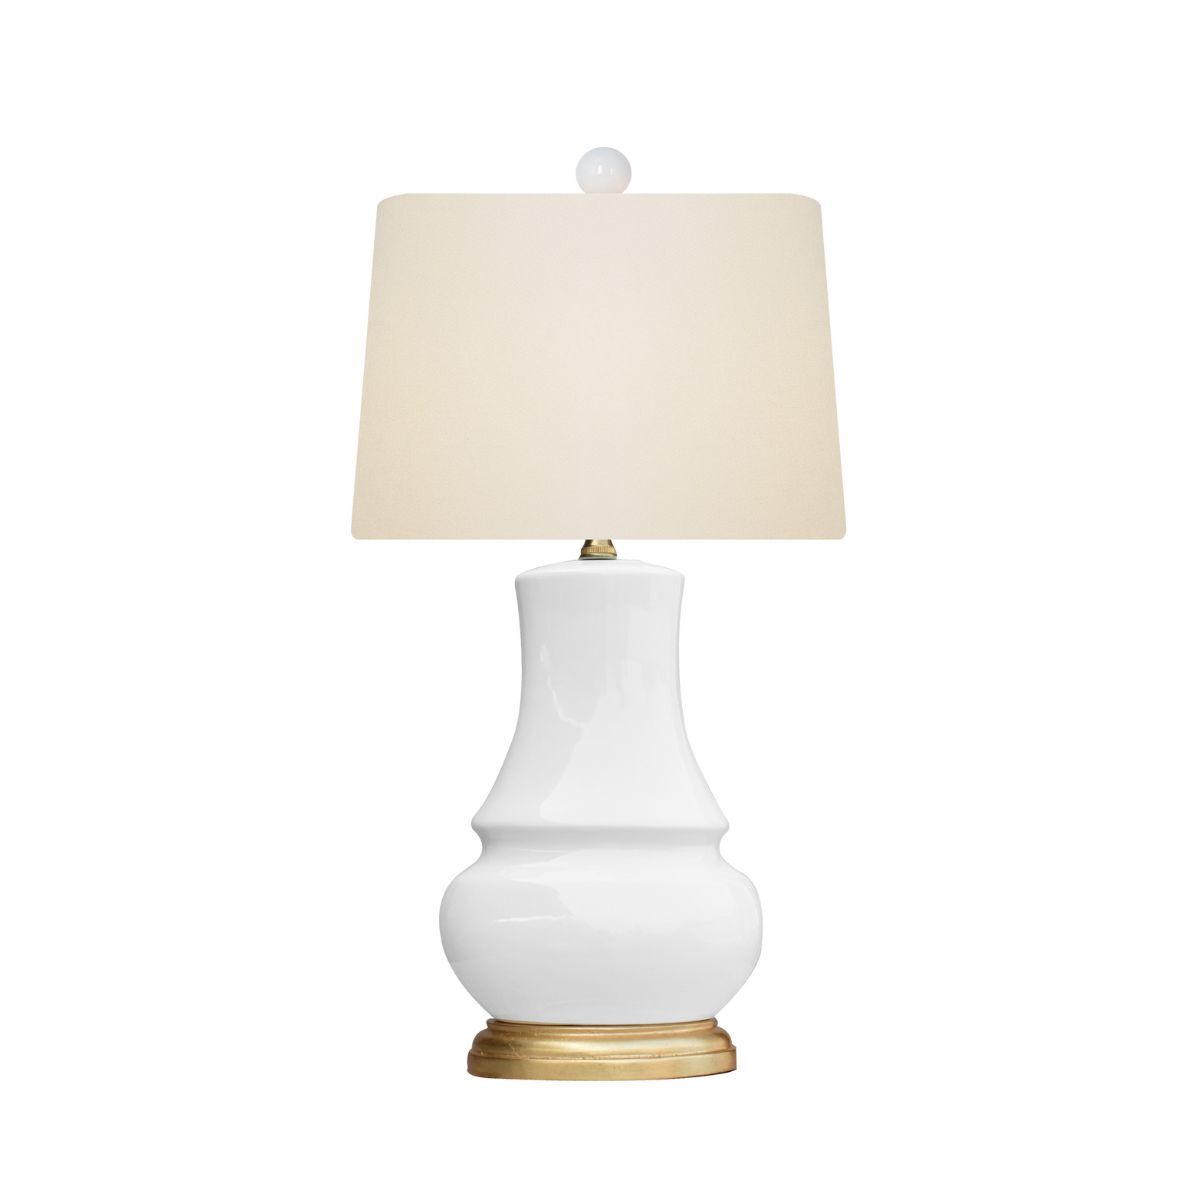 Lily Lamp in Ivory